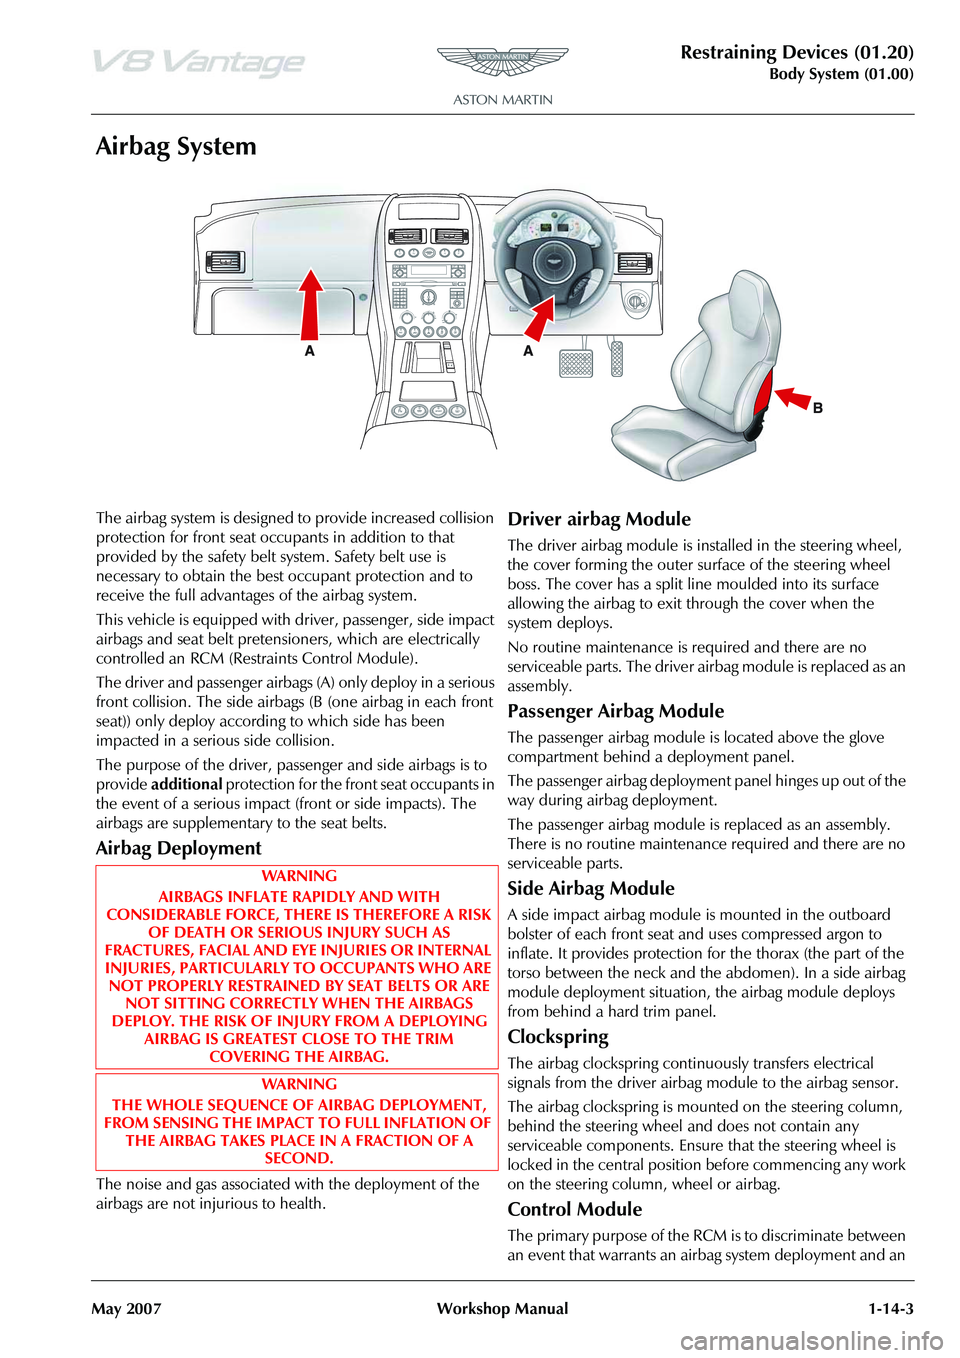 ASTON MARTIN V8 VANTAGE 2010  Workshop Manual Restraining Devices (01.20)
Body System (01.00)
May 2007 Workshop Manual 1-14-3
Airbag System
The airbag system is designed to provide increased collision 
protection for front seat occu pants in addi